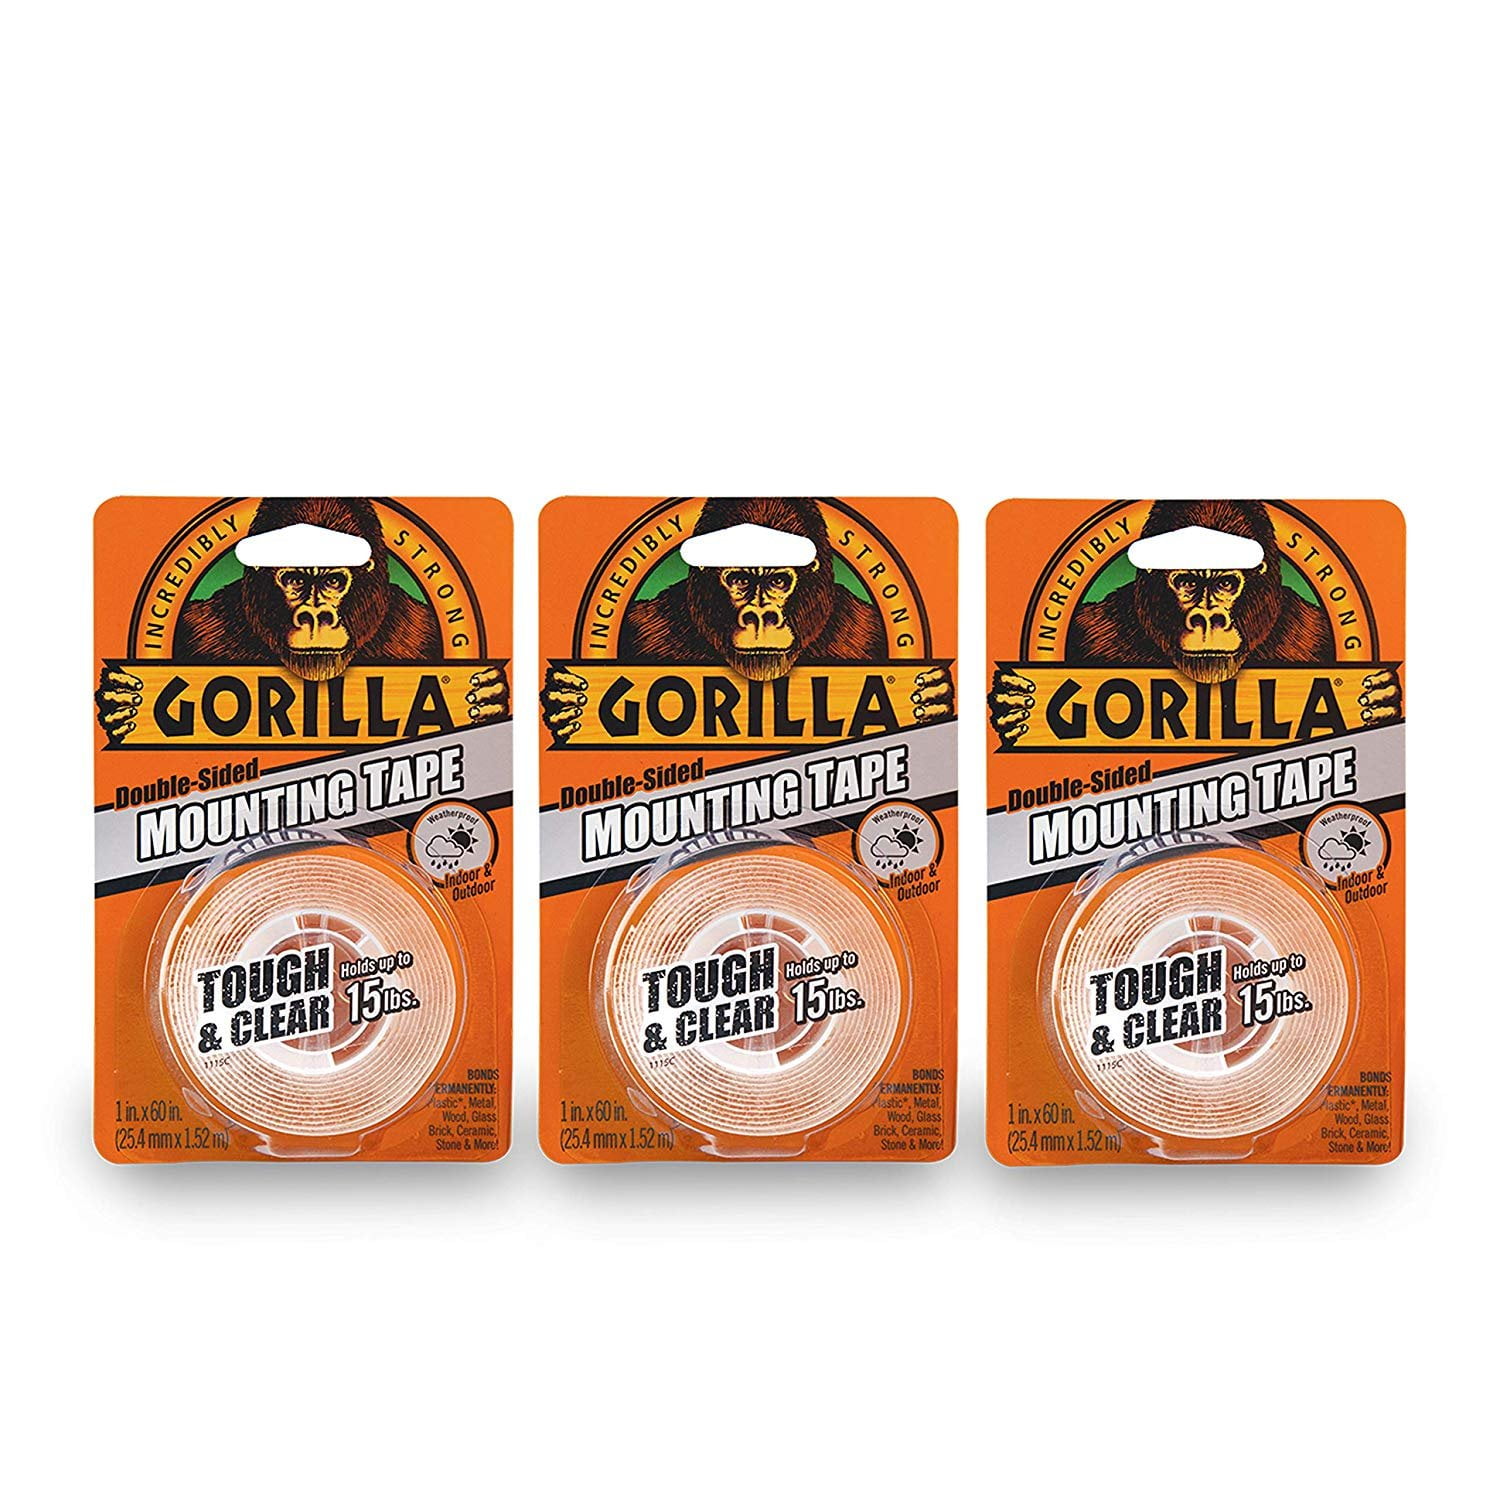 Gorilla Tough & Clear Double Sided Mounting Tape, 1 inch x 60 Inches, Clear, Pack of 4, Size: 4 Pack 6065003